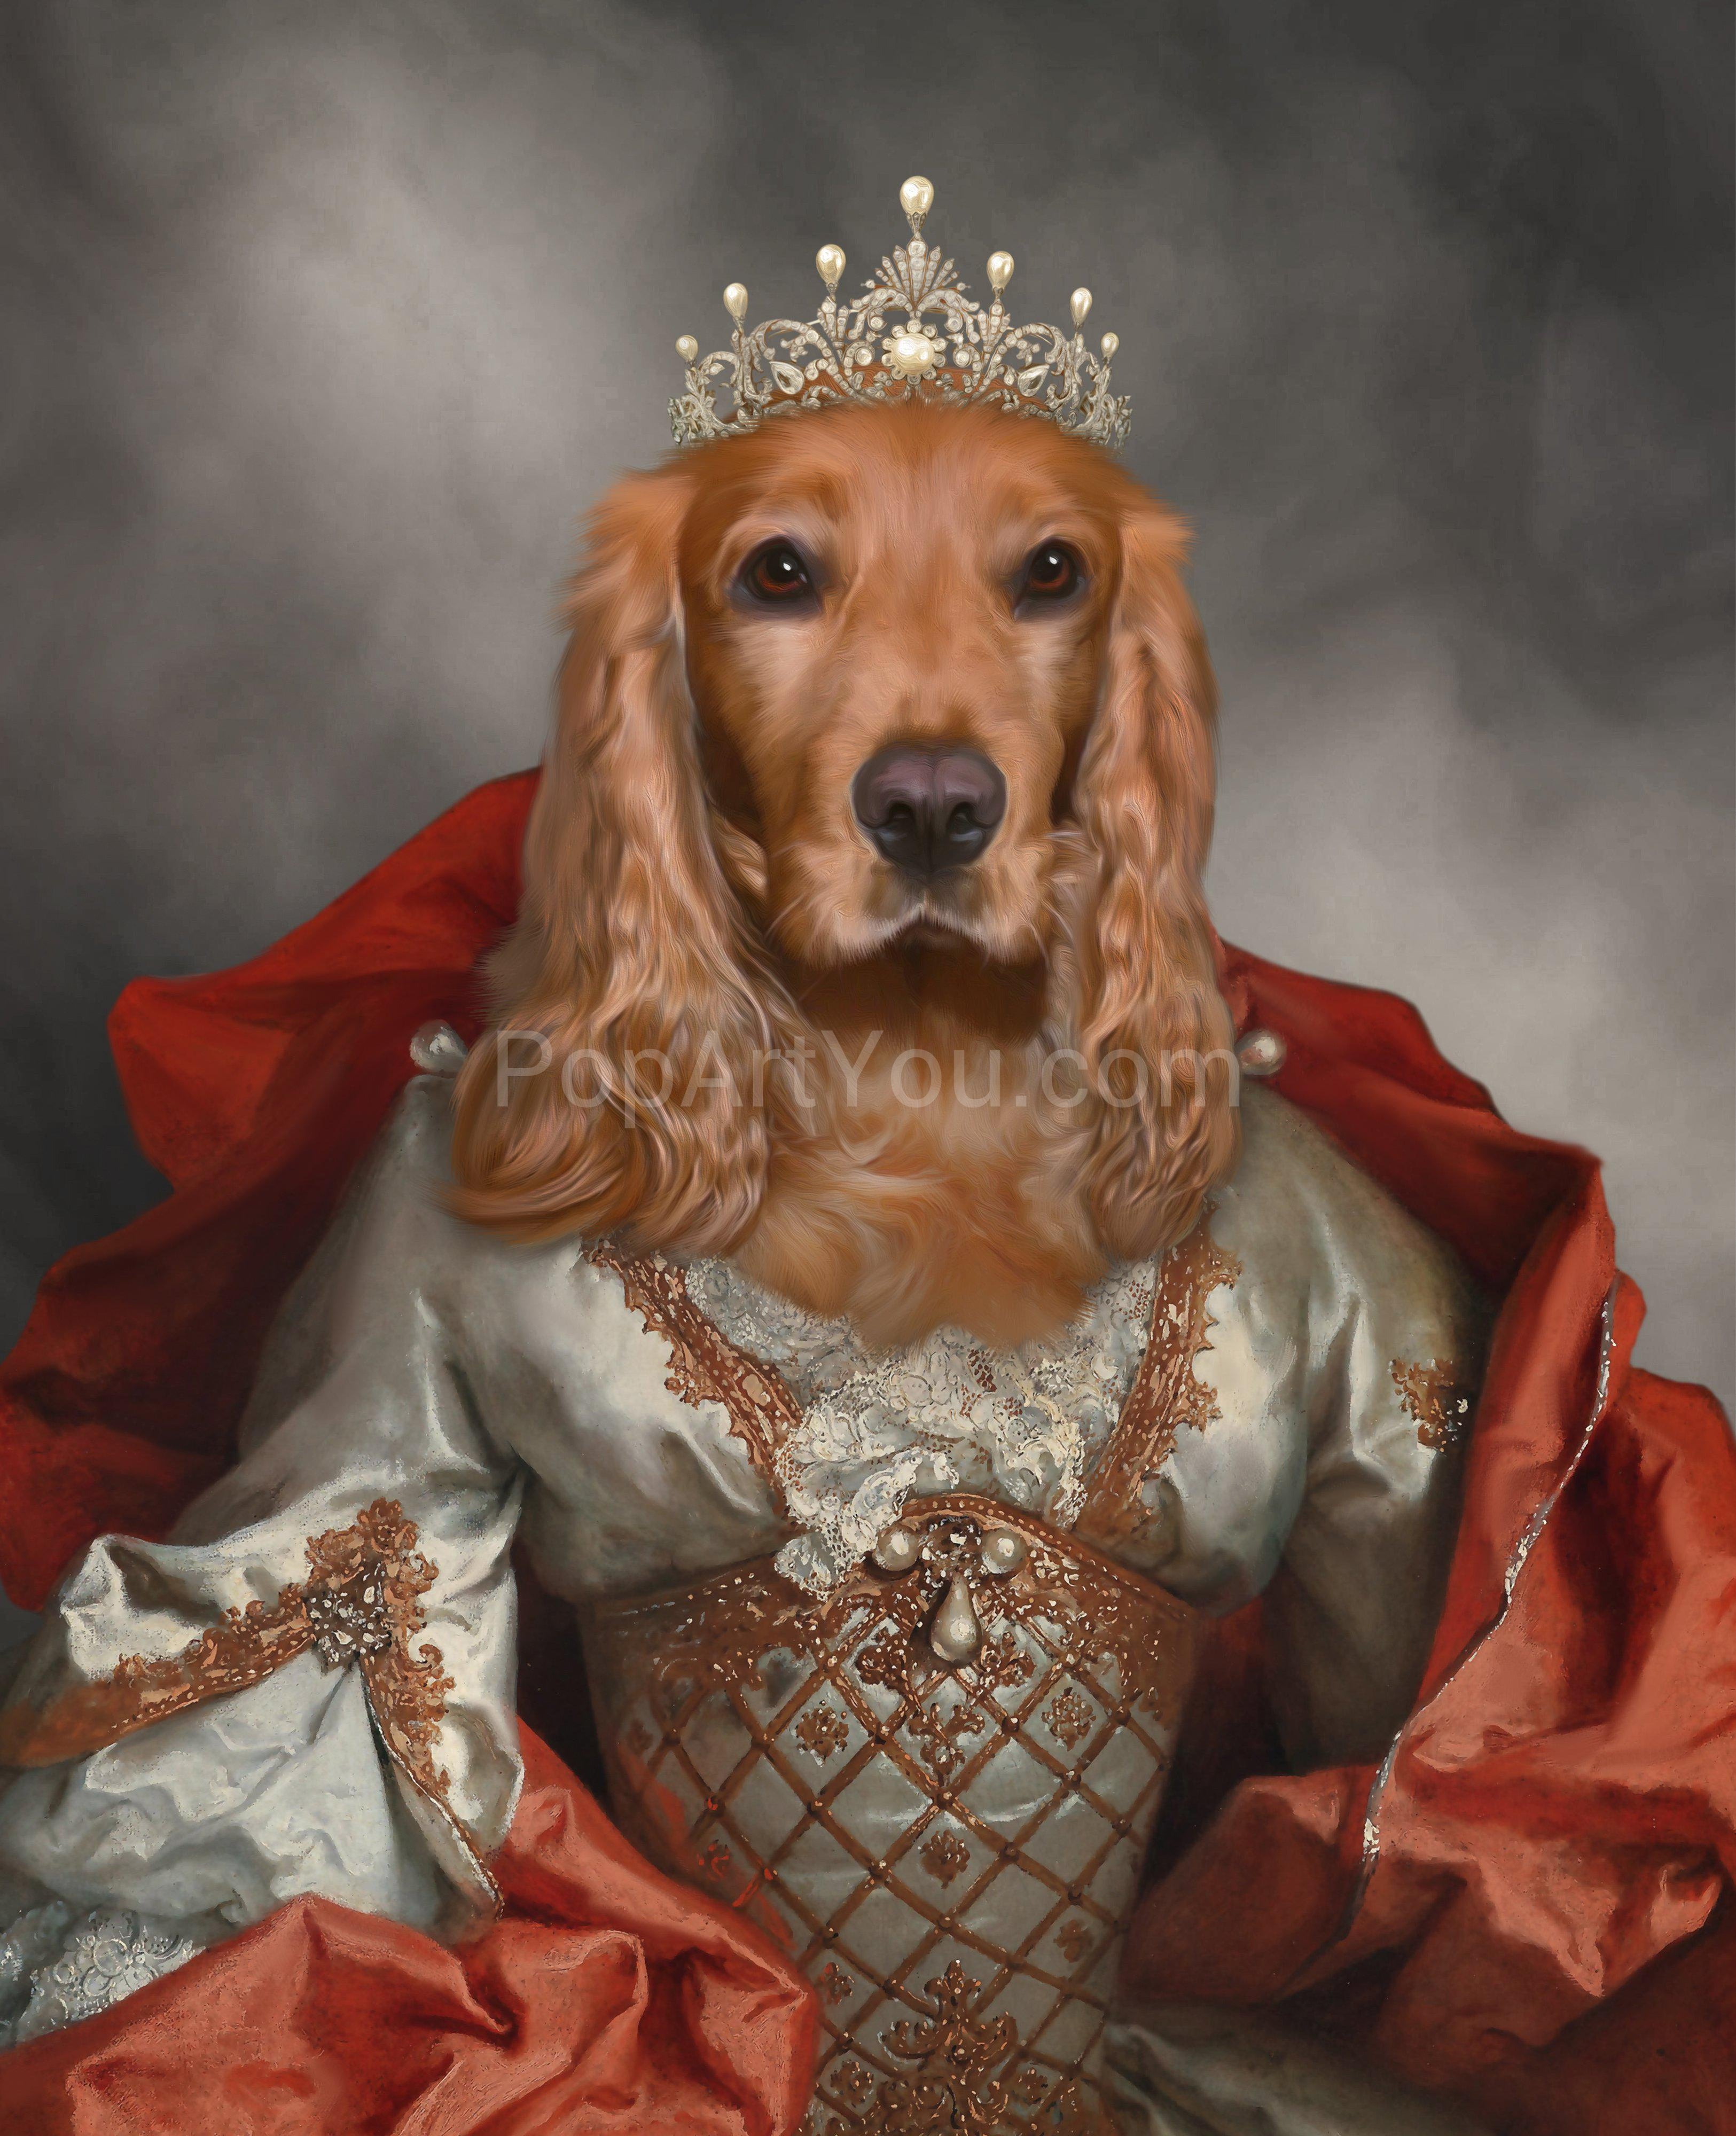 The portrait shows a red-haired dog with a human body, dressed in a silver royal dress with a red mantle